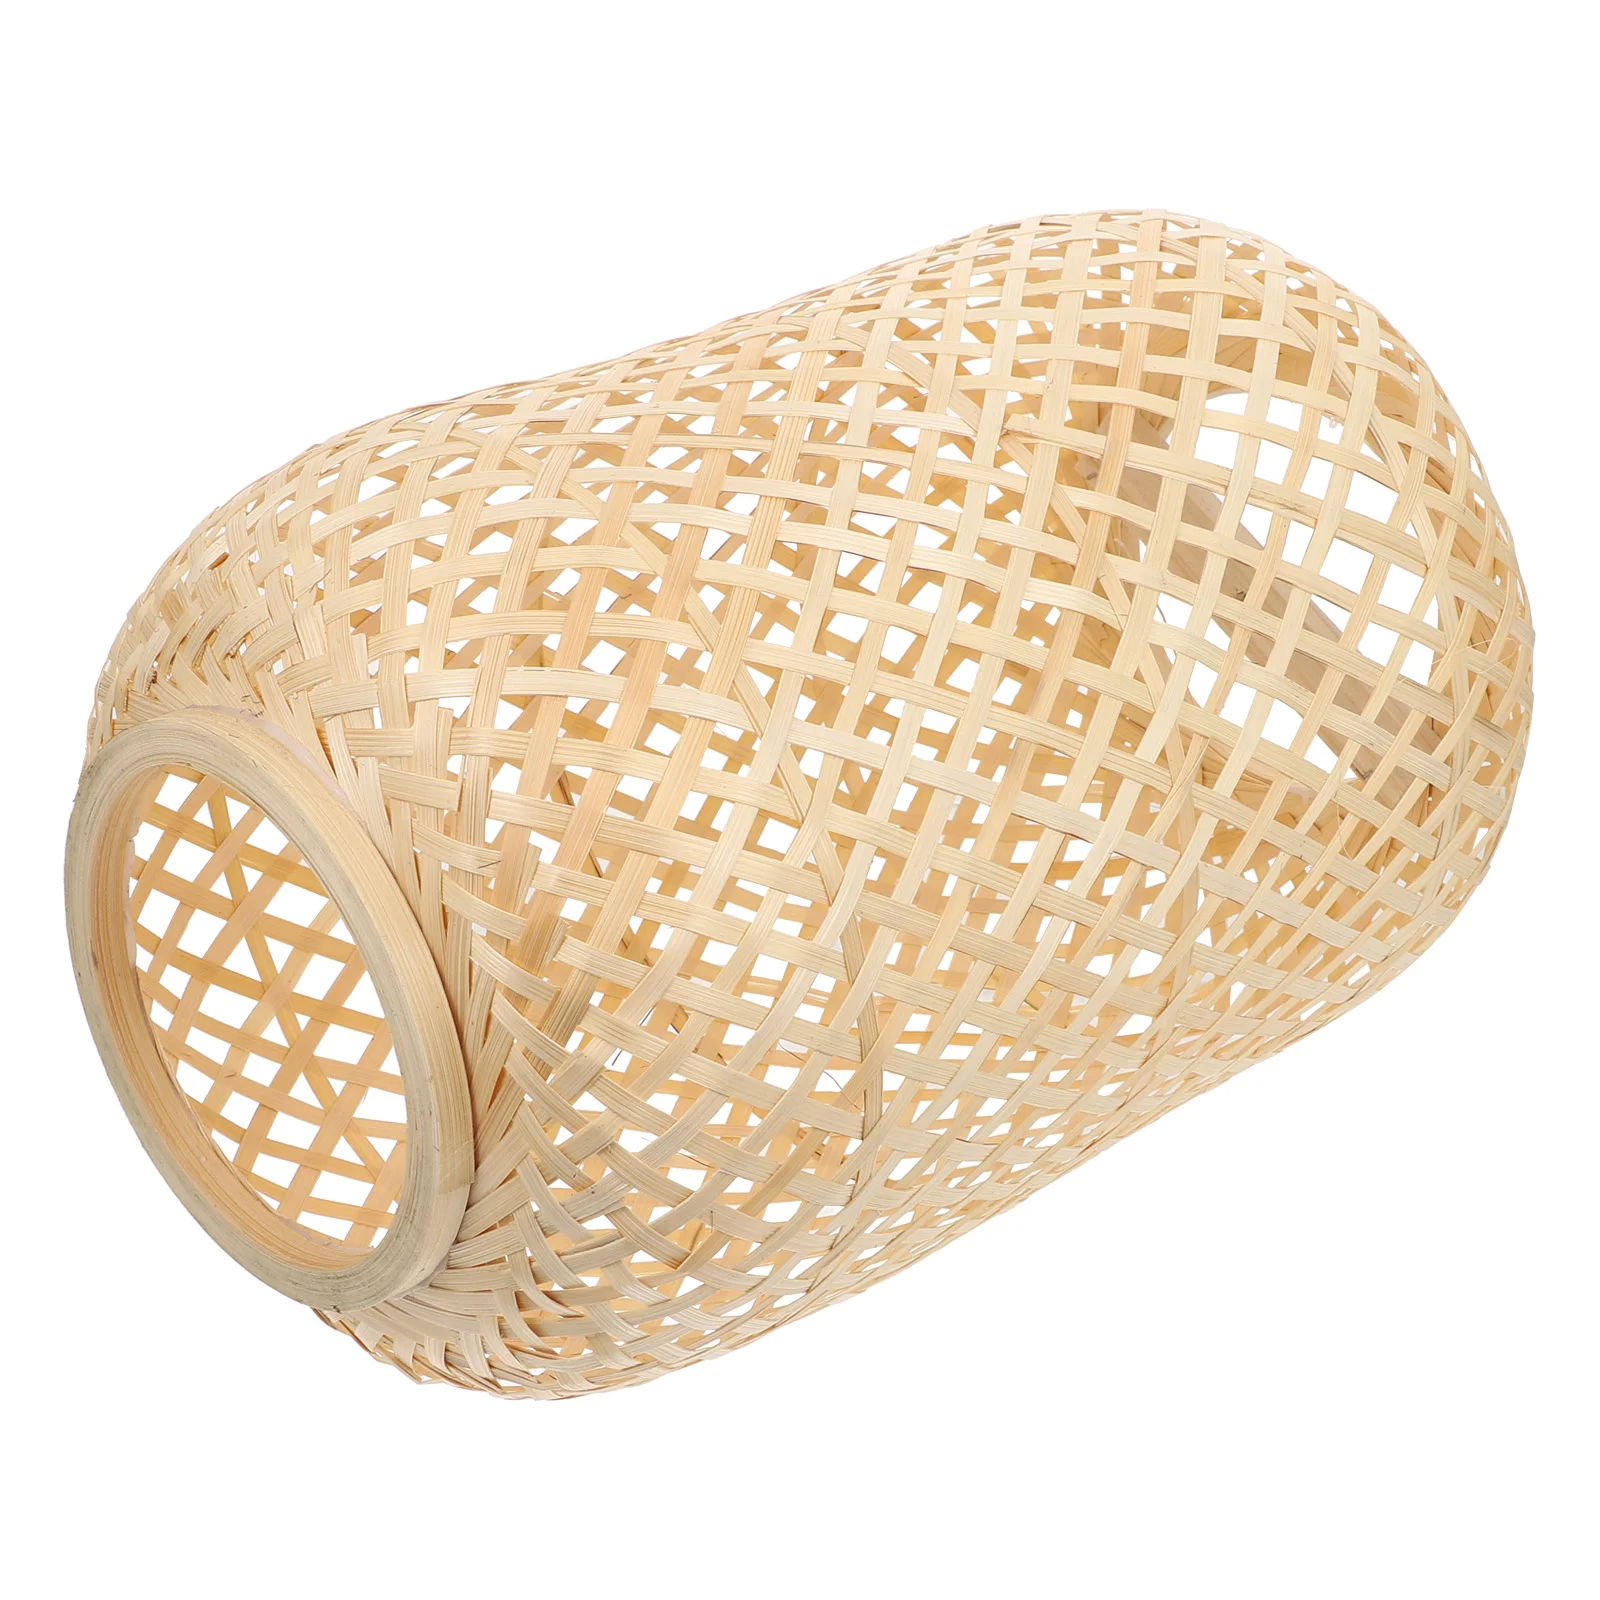 

Bamboo Woven Lampshade Hand Woven Bamboo Art Weaving Craft Lampshade Rustic Ceiling Light Cover Natural Light Shell Khaki